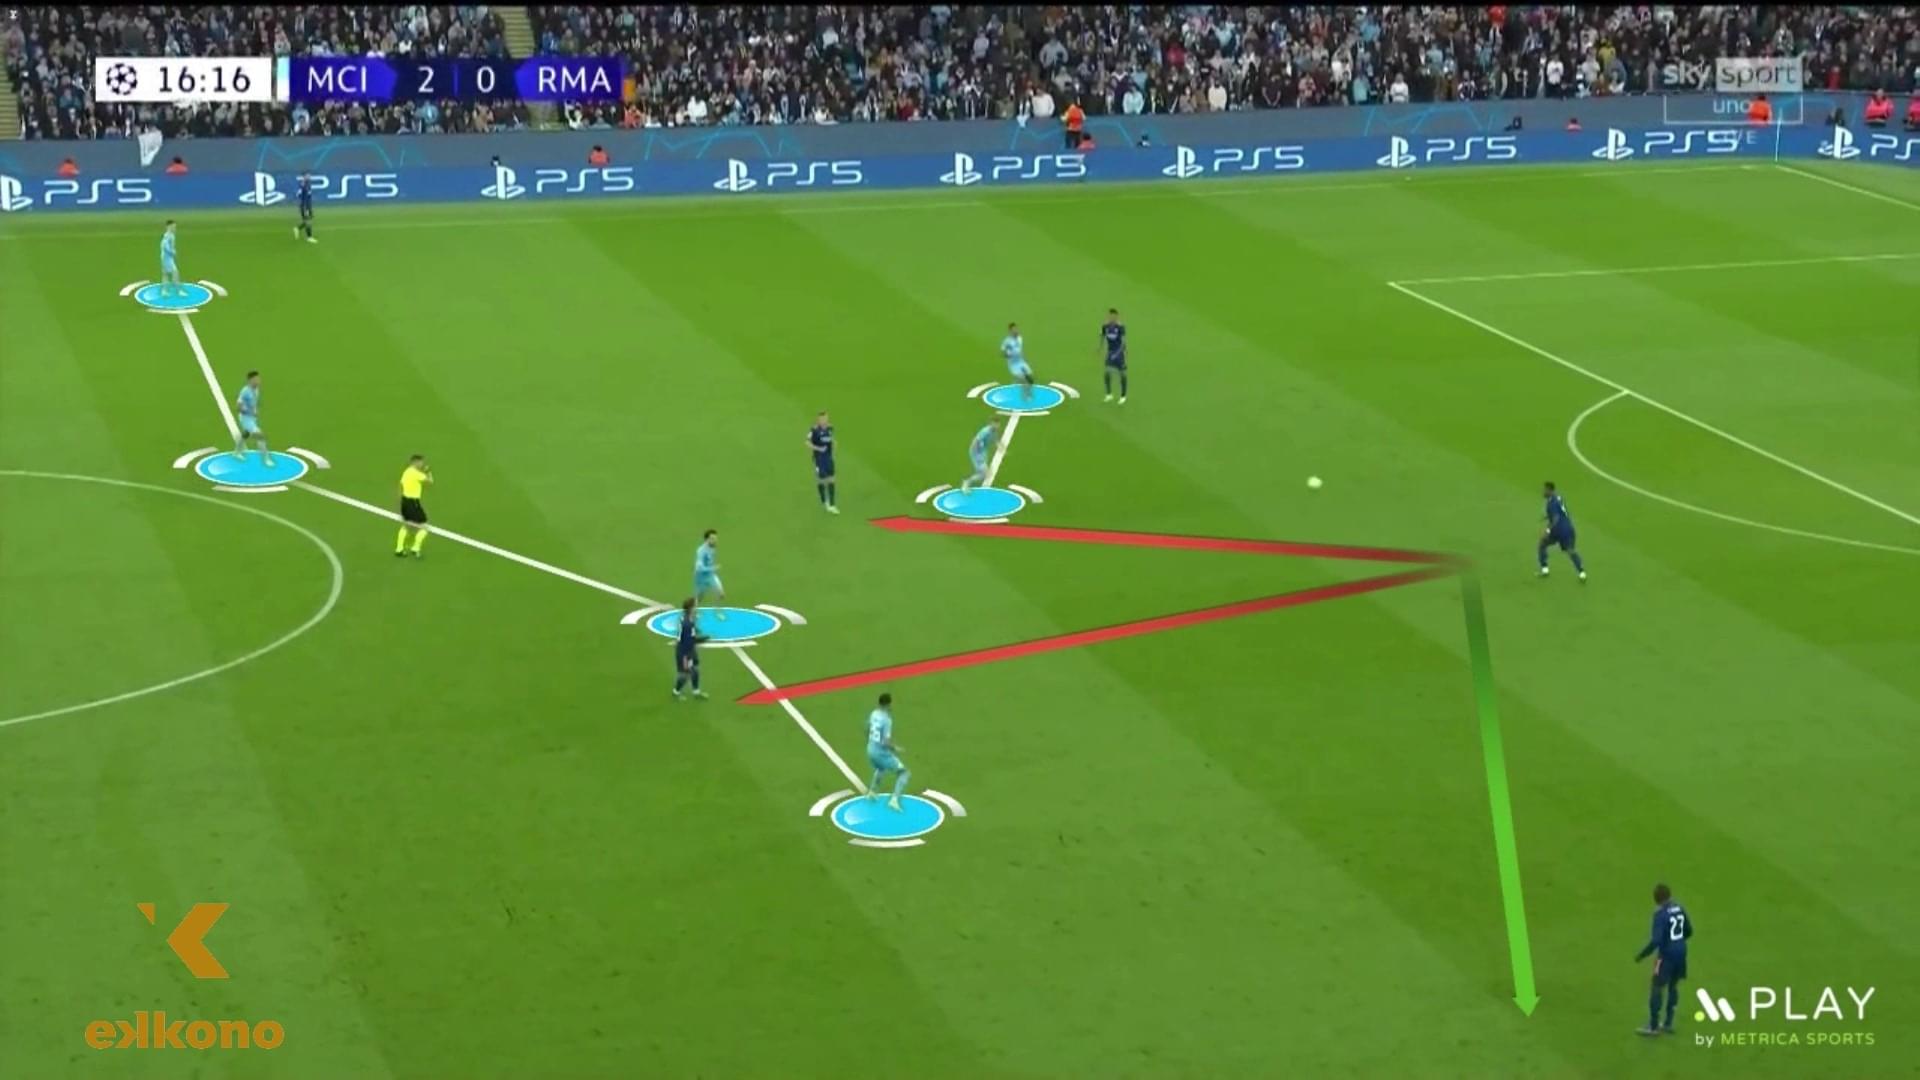 caption of a match between MCI and RMA, focusing on the attackers movements